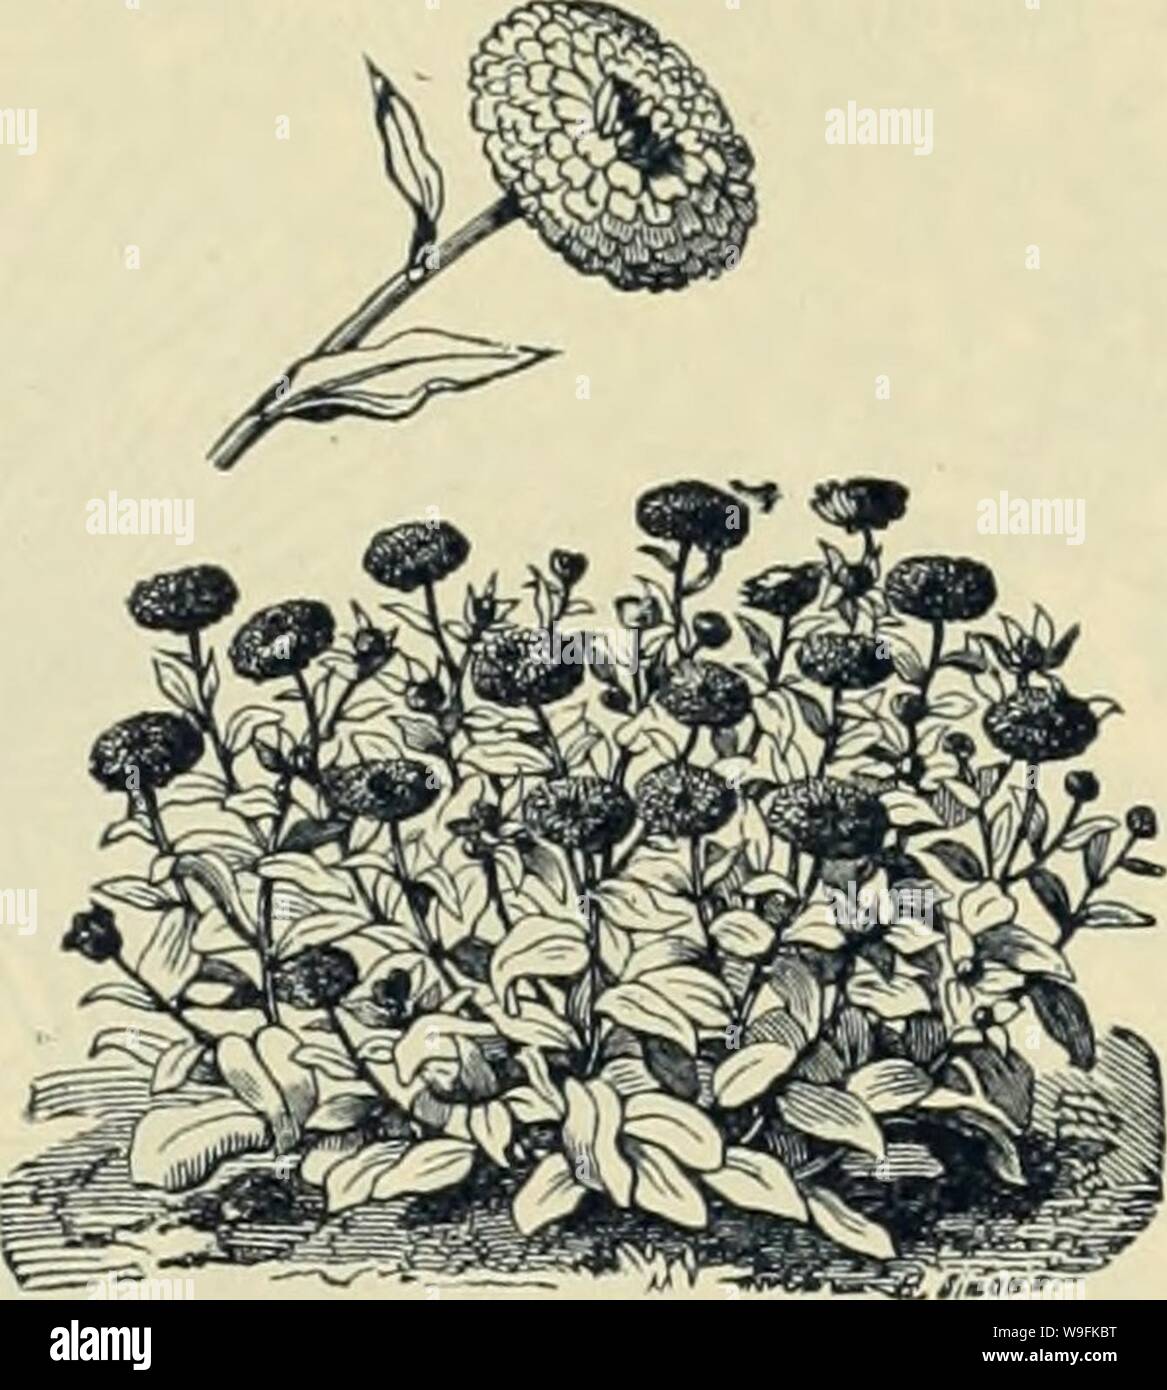 Archive image from page 50 of Currie Bros' horticultural guide . Currie Bros.' horticultural guide : spring 1888  curriebroshortic1888curr Year: 1888 ( CALENDULA-Cape Marigold, Attractive and free-blooming hardy annuals, doing well in almost any situation. The Pot Marigold, C. Pongei, is much prized as a pot plant. Officinalis Le Proust—Uniformly double; nan- keen; edged with brown 5 Officinalis Meteor—A variety, very fine for pot culture, bearing light-yellow flowers striped with bright orange 5 Pluvialis—Pure white; 1 foot 5 Pongei fl. pi. (Pot Marigold)—Double white 5 Prince of Orange—An im Stock Photo